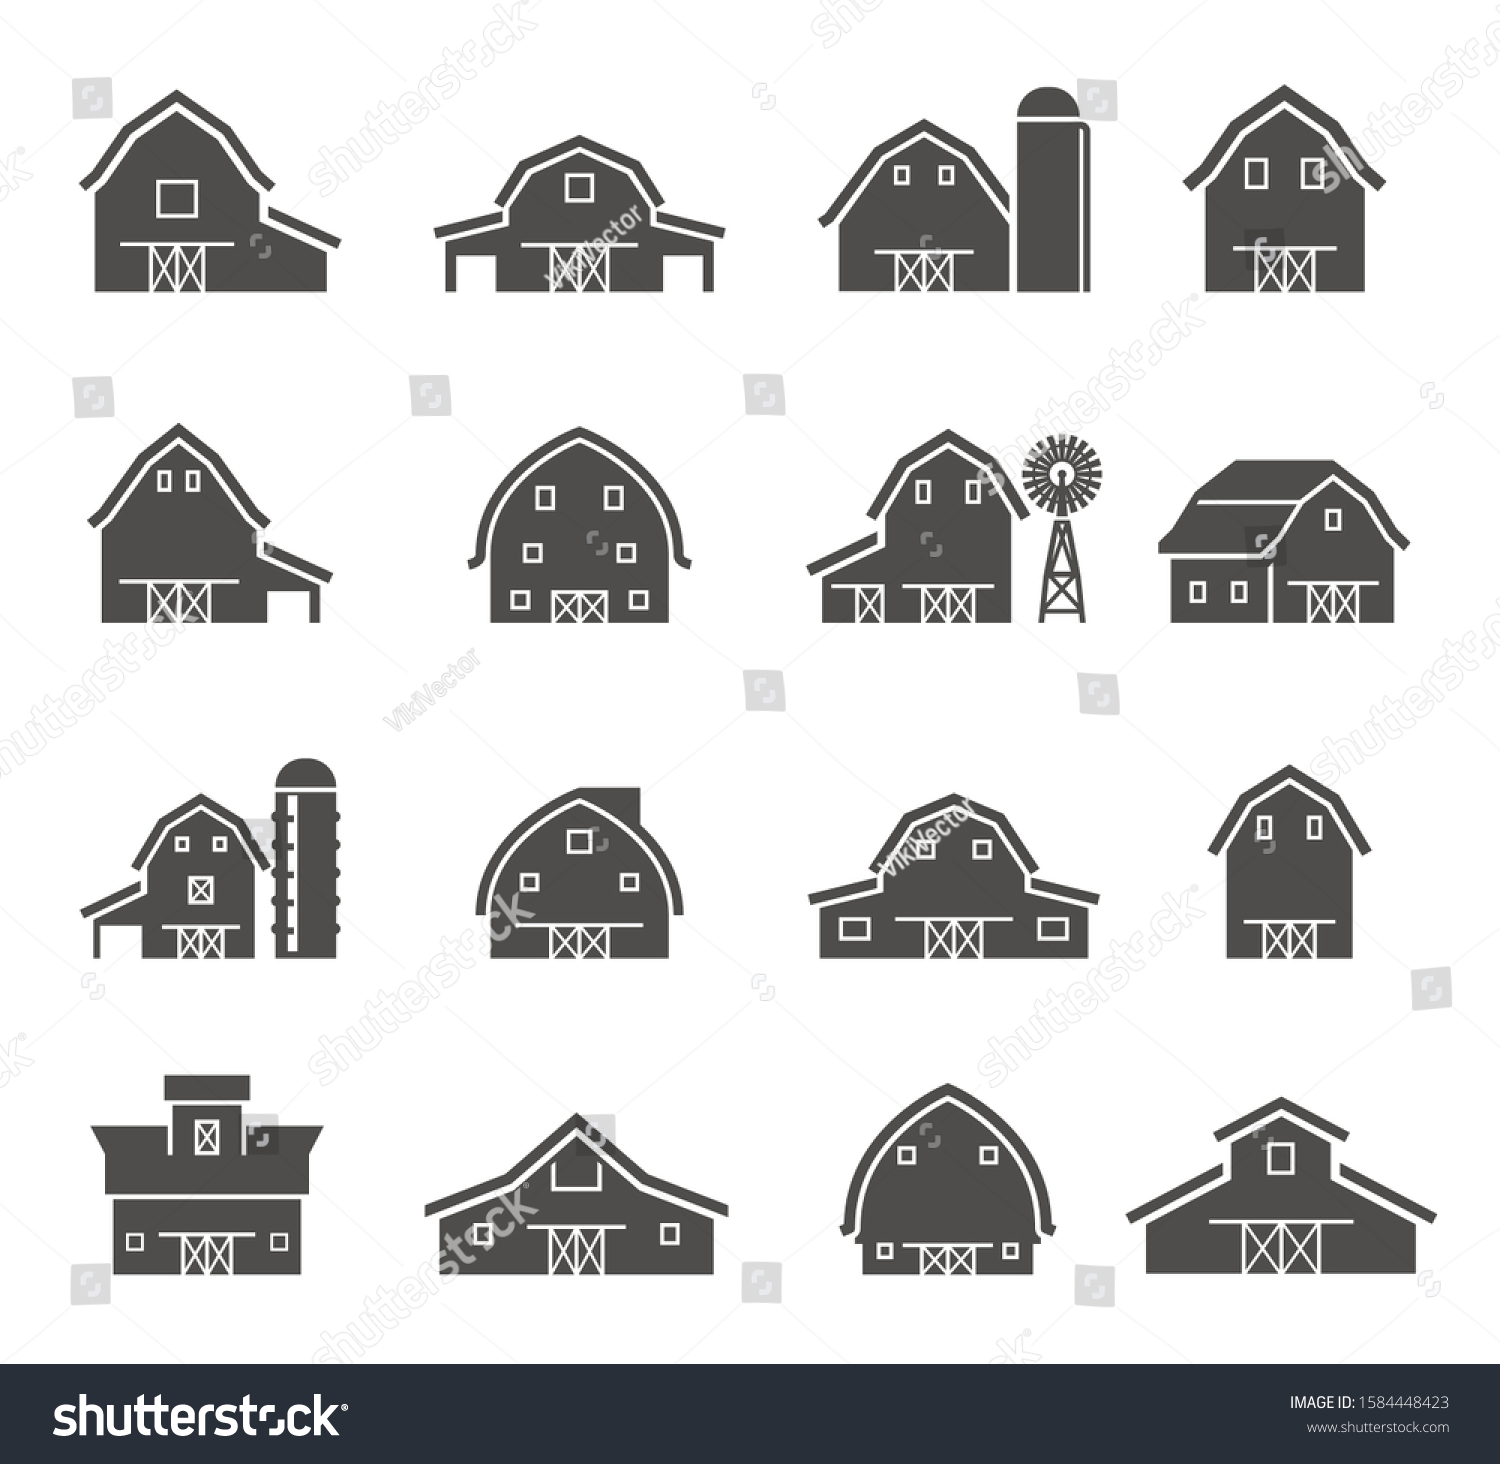 Rural barn building silhouettes glyph icons set. Farmyard architecture negative space symbols. Farm barns with water towers isolated on white background. Farm sheds, wind pump and silo pictograms #1584448423